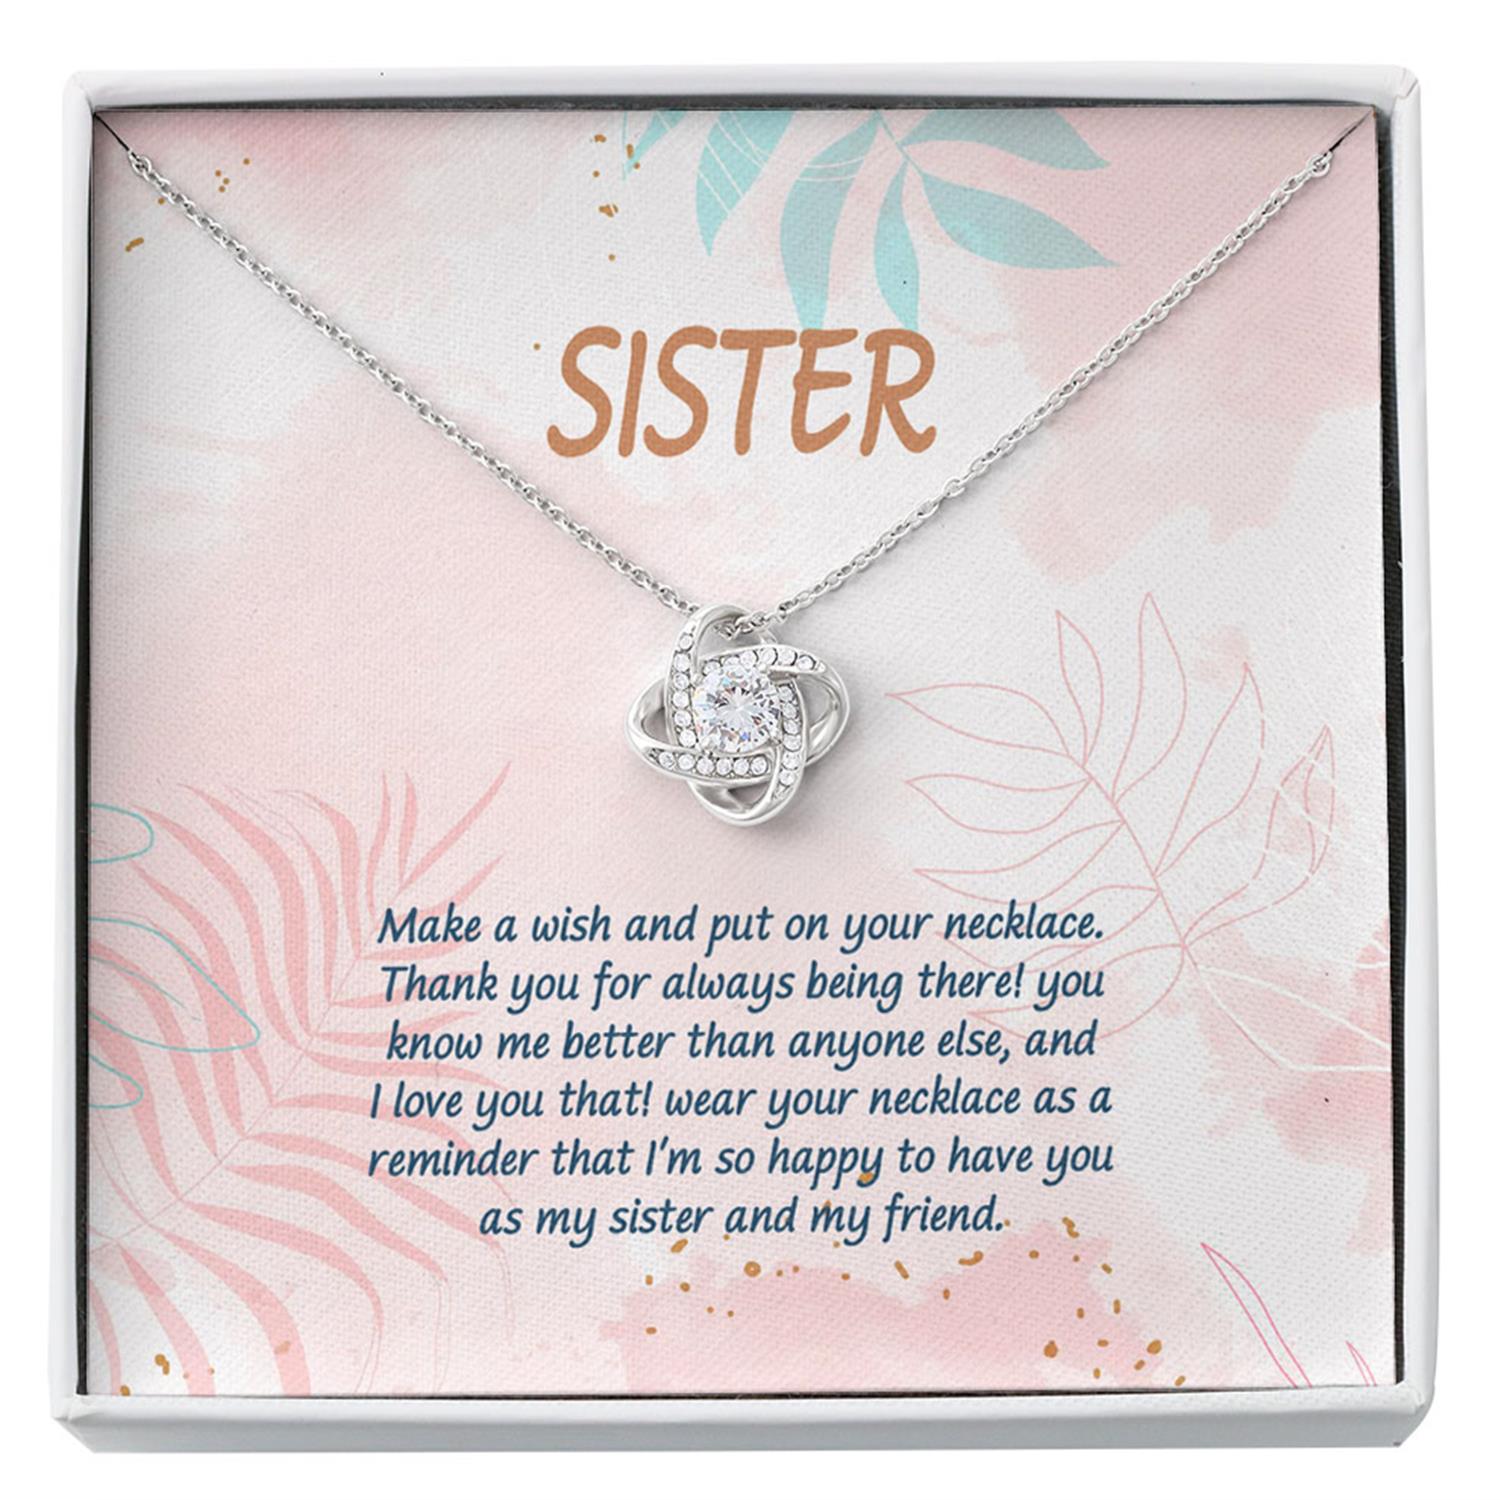 Sister Necklace, Love Knots Necklace - Sister Necklace My Sister And My Friend Custom Necklace